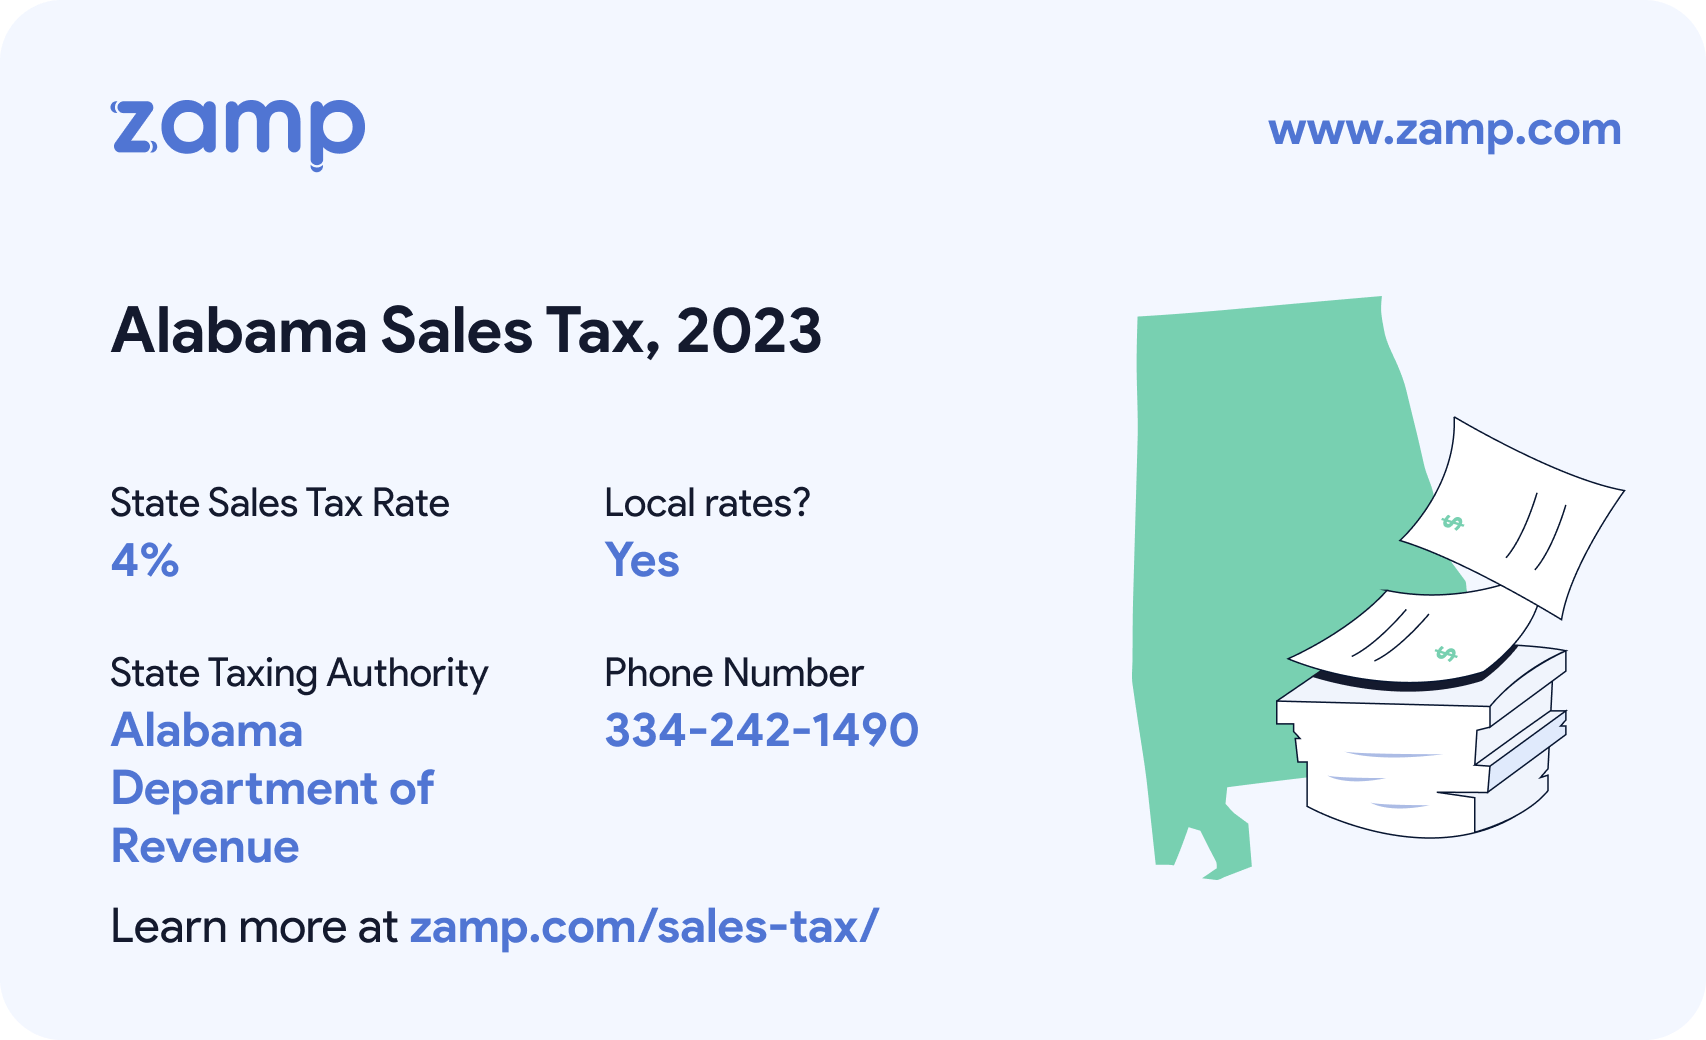 Alabama basic sales tax info for 2023 - State sales tax rate: 4%, Local rates? Yes; State Taxing Authority: Alabama Department of Revenue; and phone number 334-242-1490